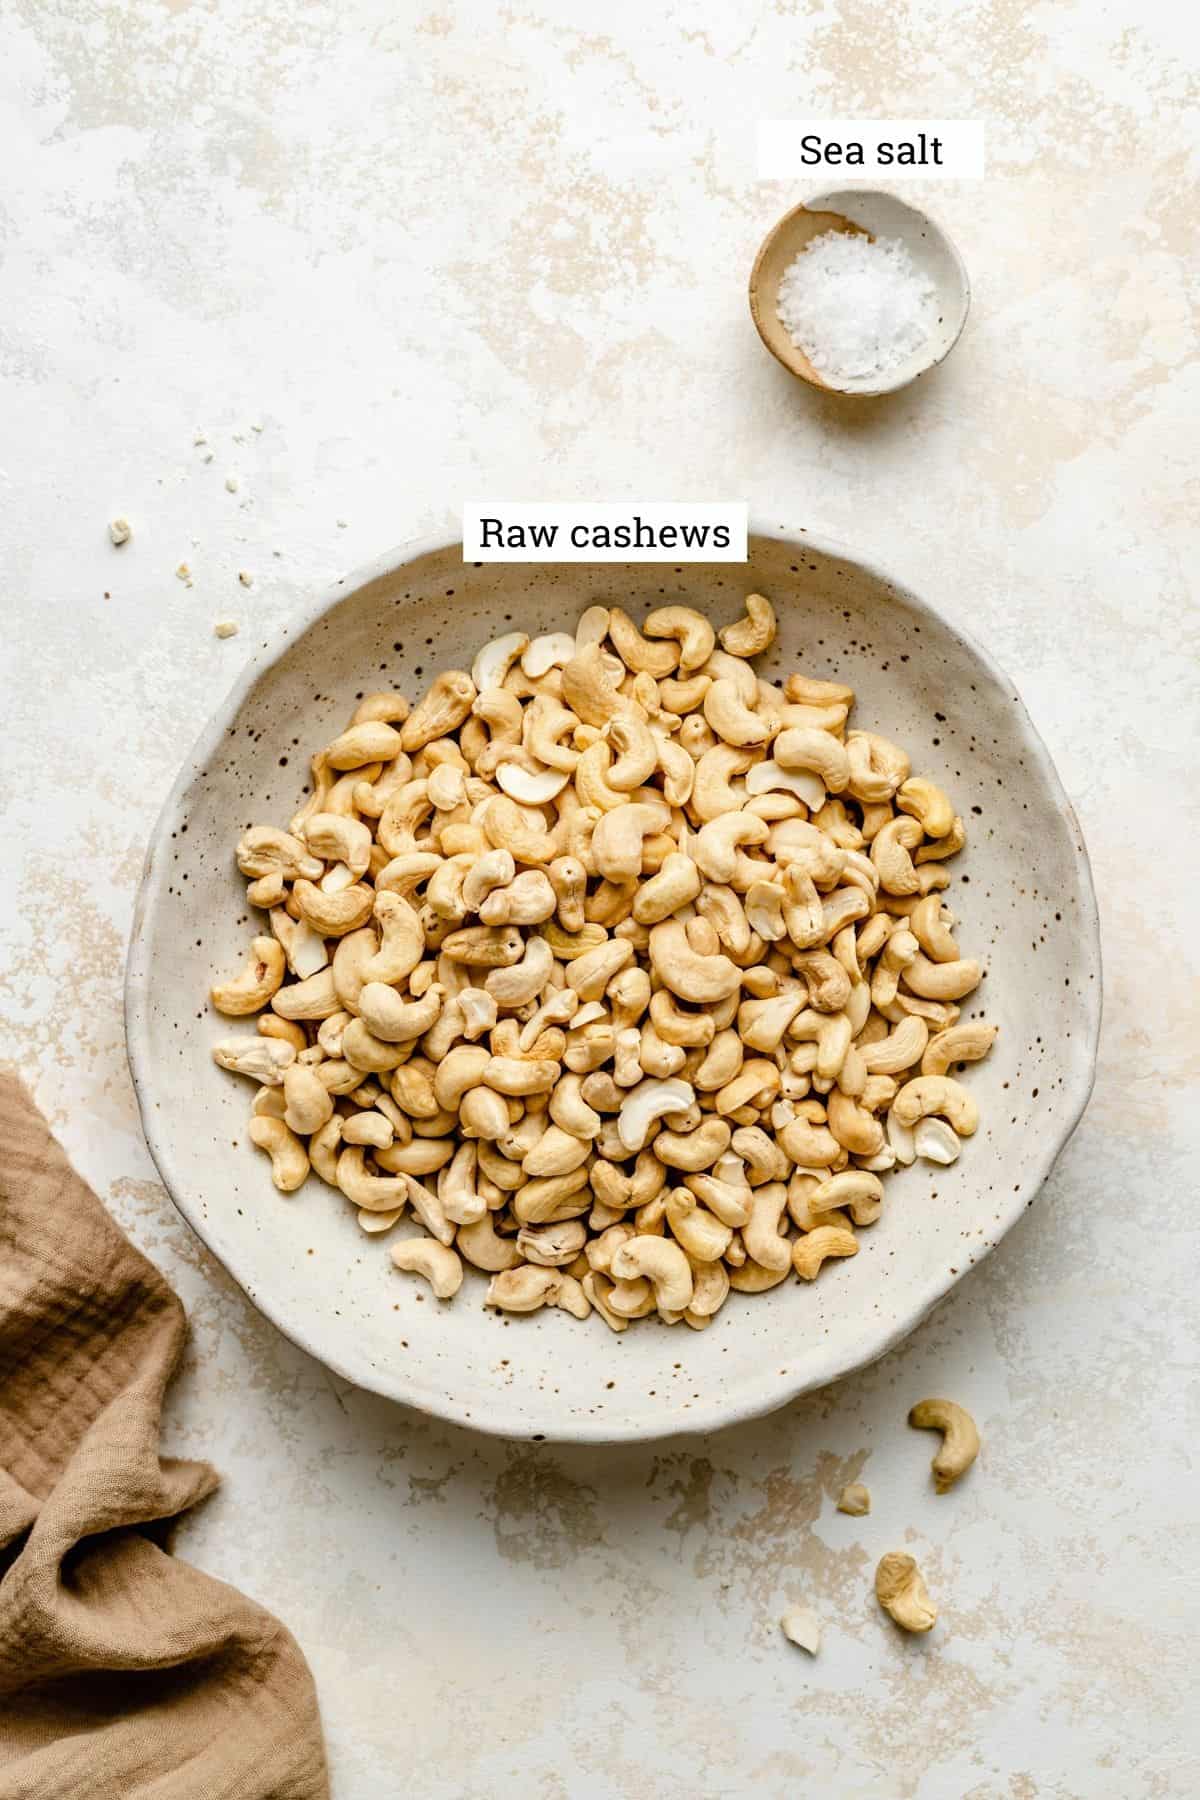 A bowl of raw cashew nuts and a smaller dish of flaky sea salt.